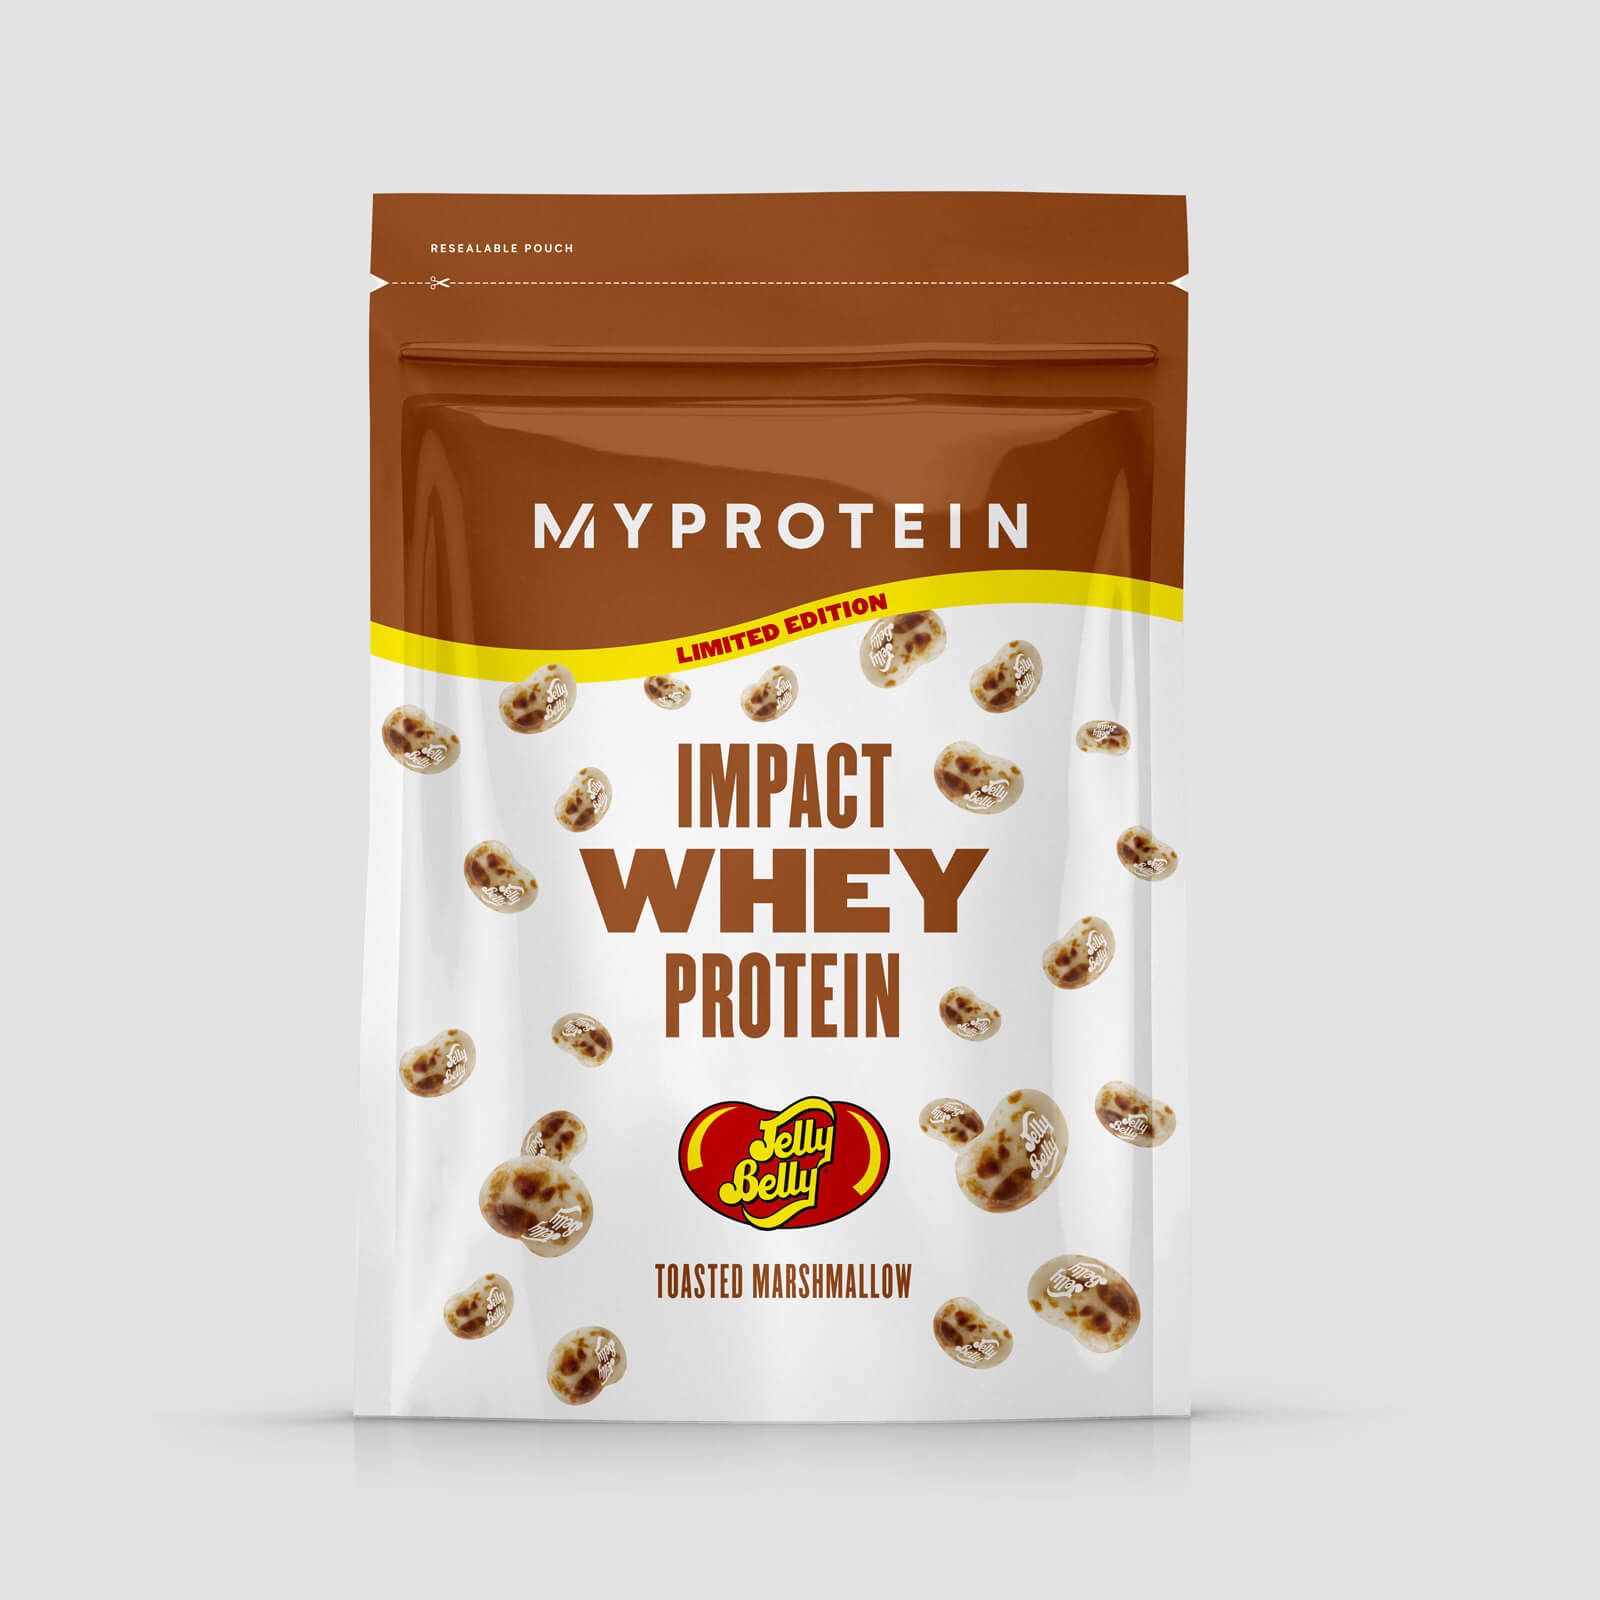 Impact Whey Protein - 1kg - Jelly Belly - Toasted Marshmallow